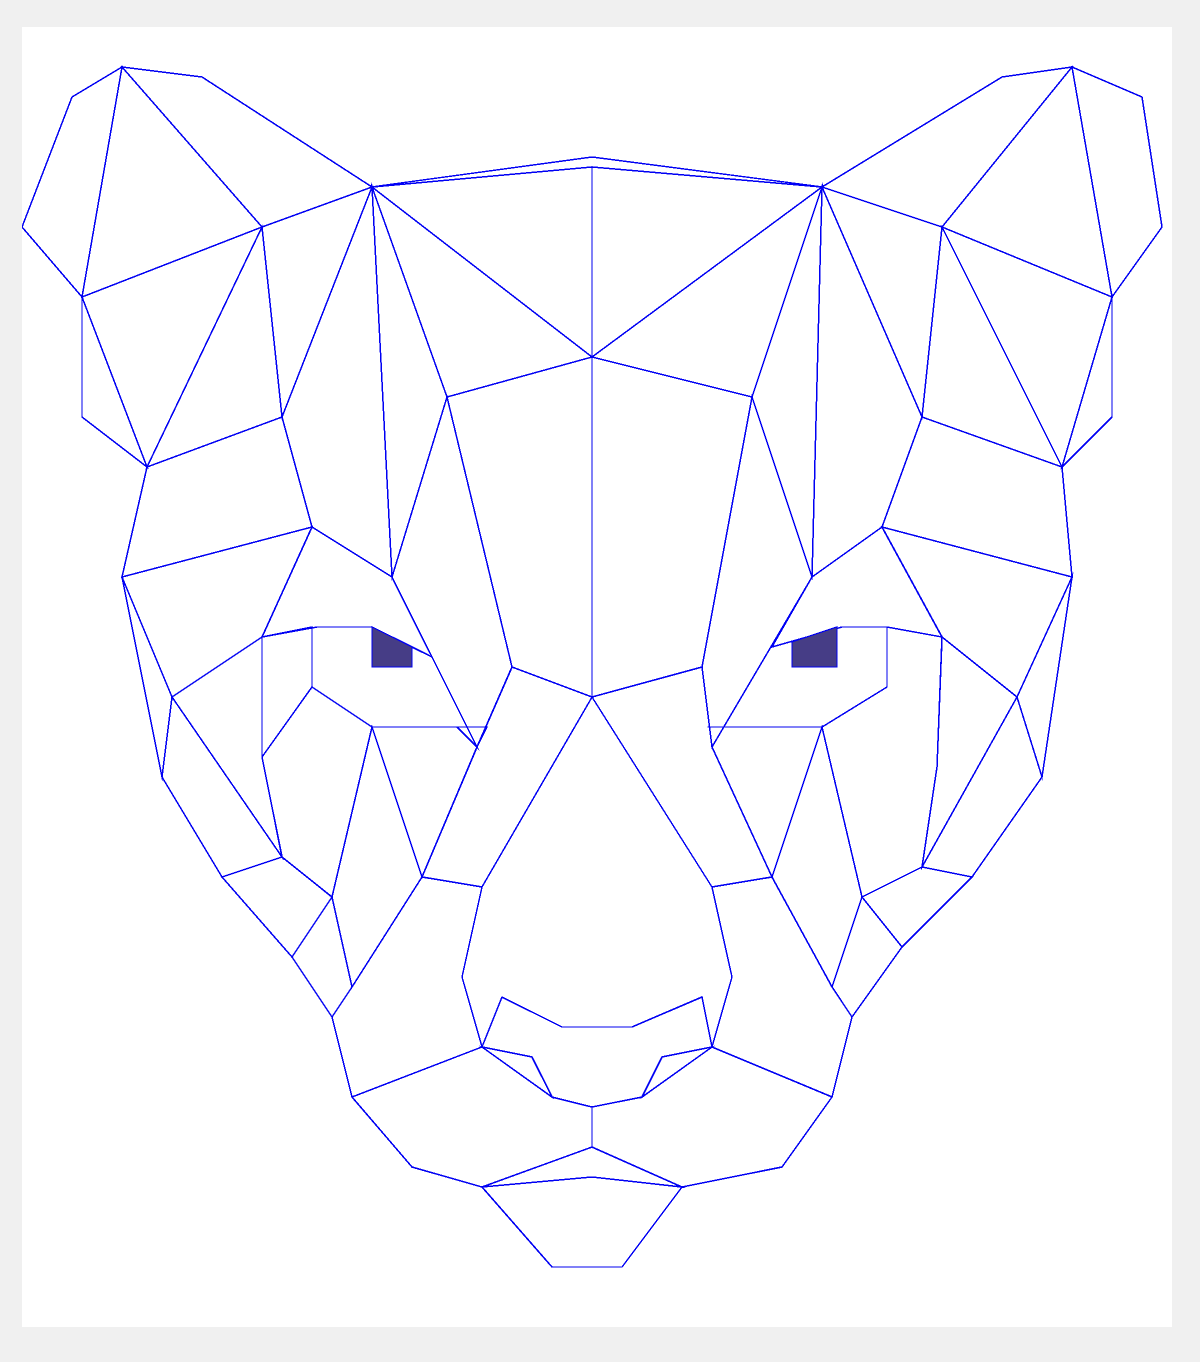 Puma’s head made of blue lines outlining white shapes on a white background.